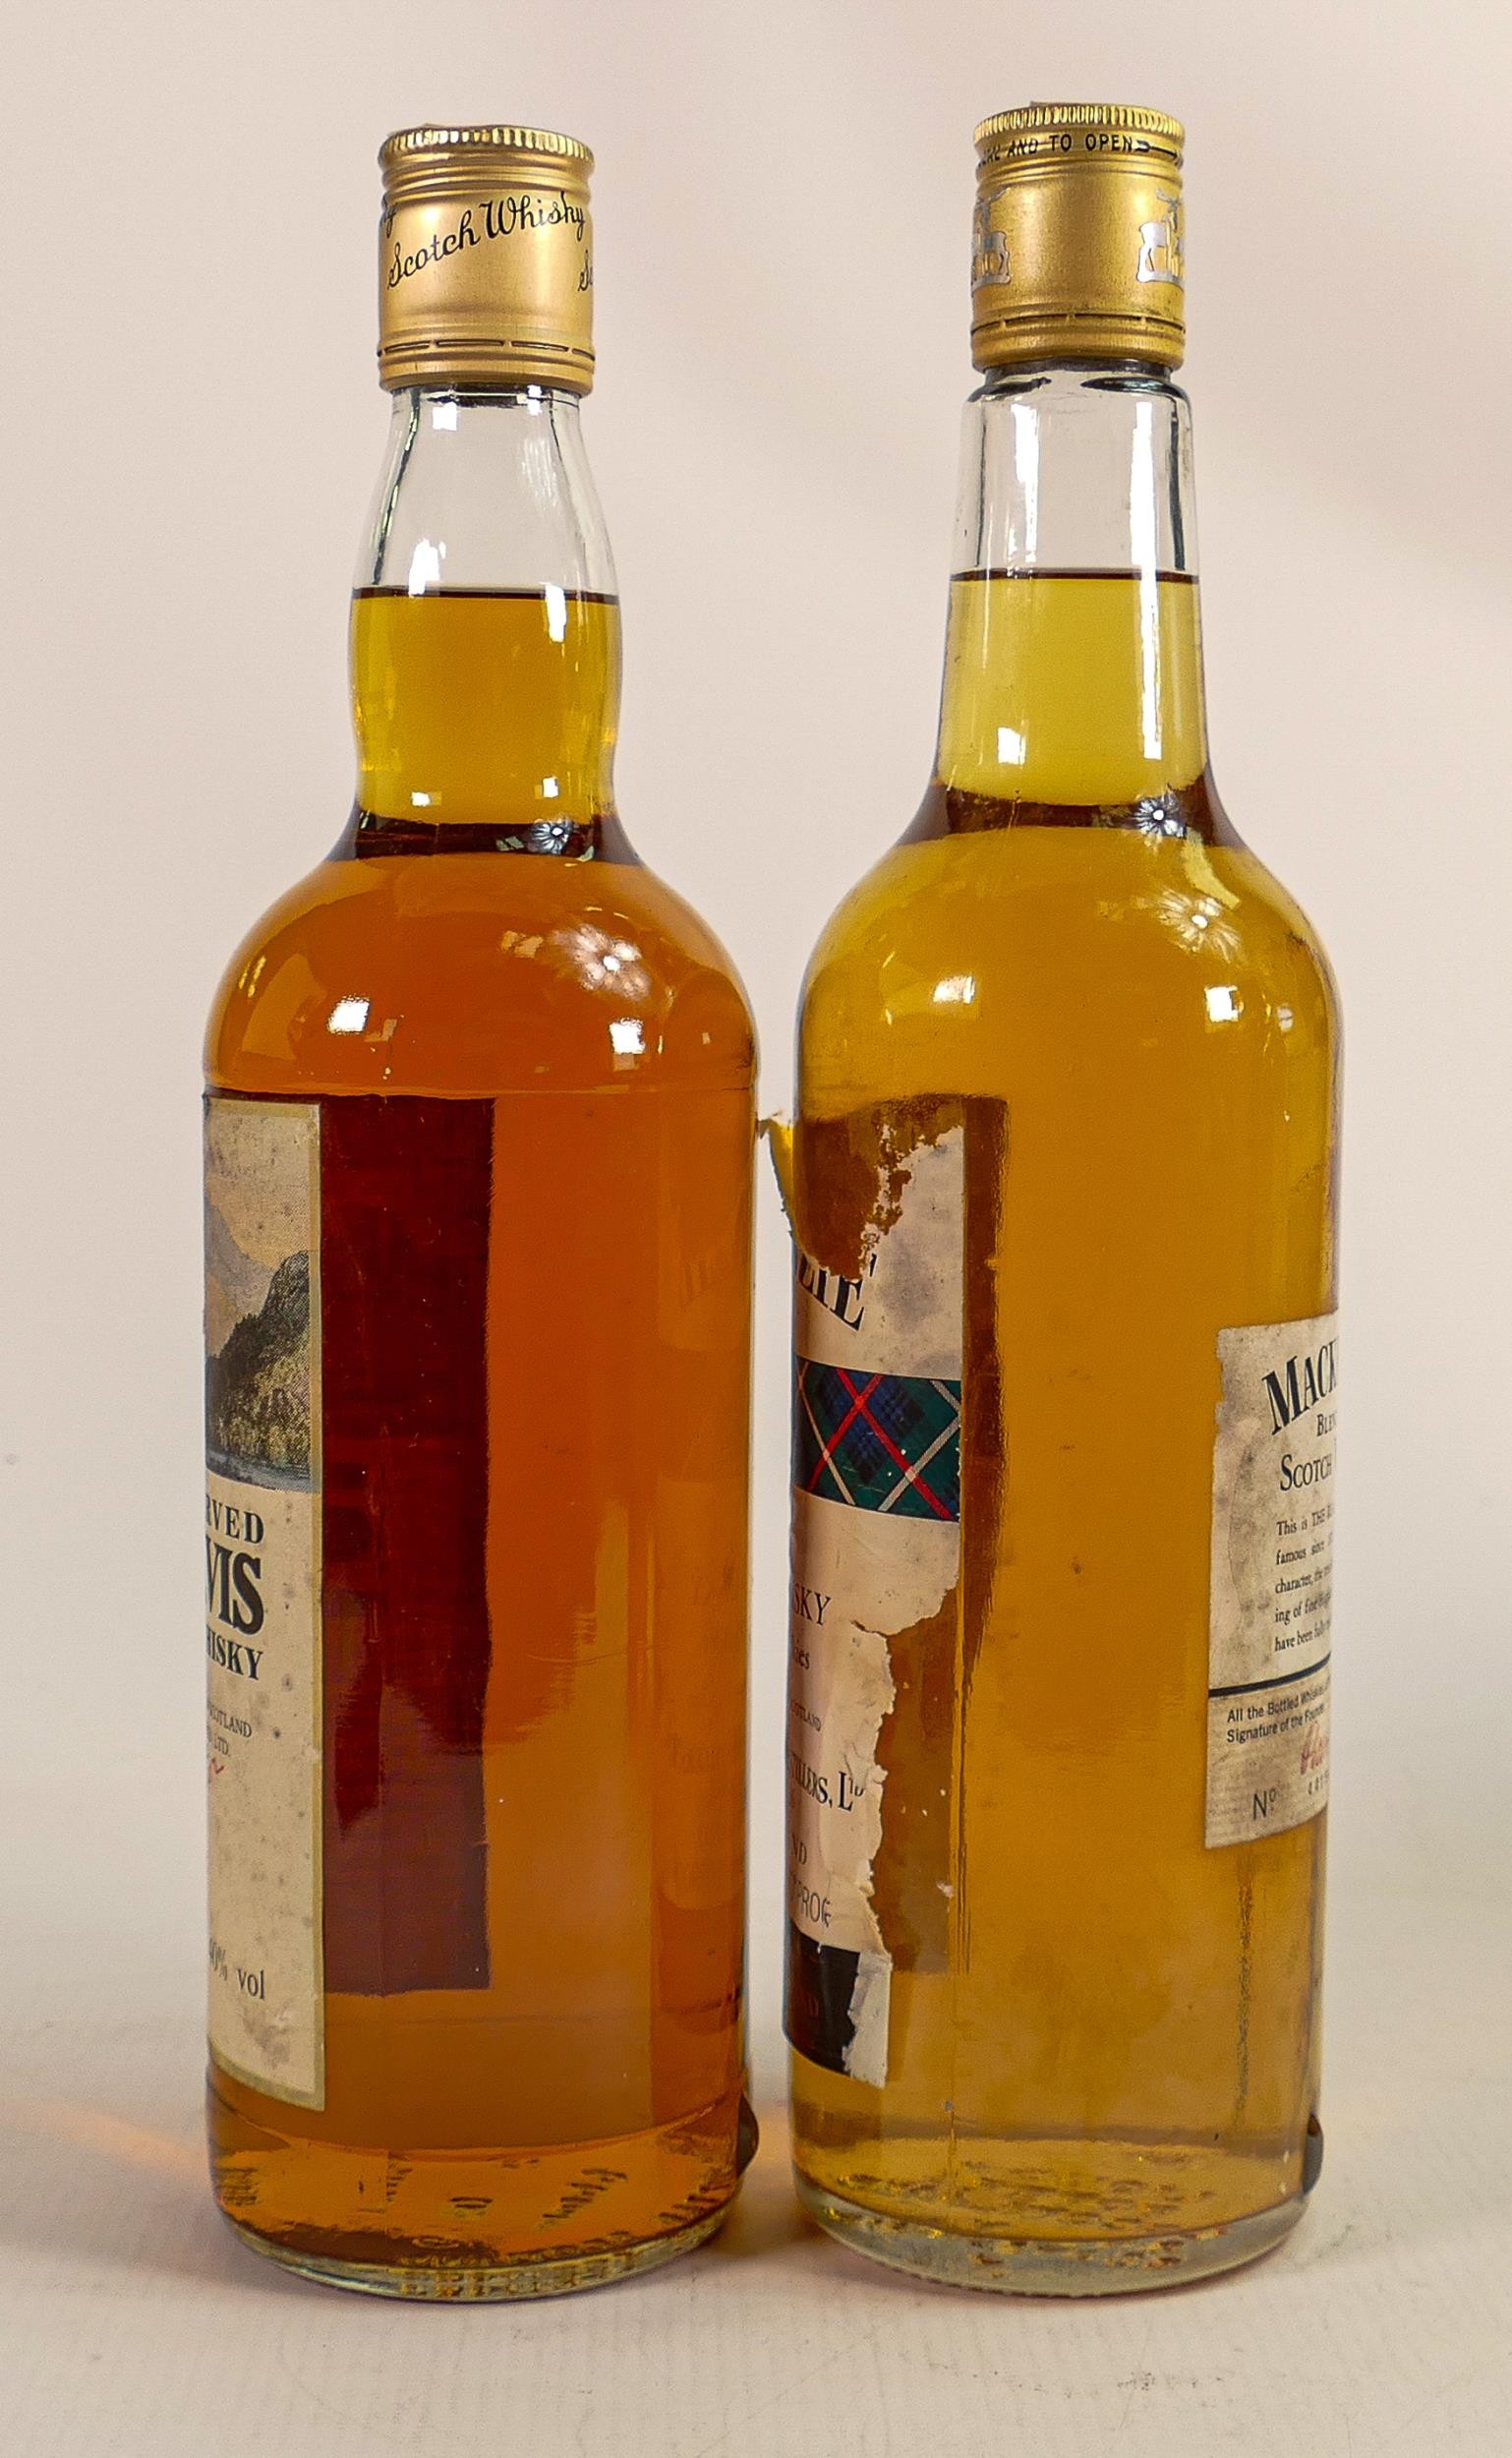 Glen Nevis Finest Reserved Scotch Whisky together with a similar bottle of Mackenzie Whisky. (2) - Image 4 of 4